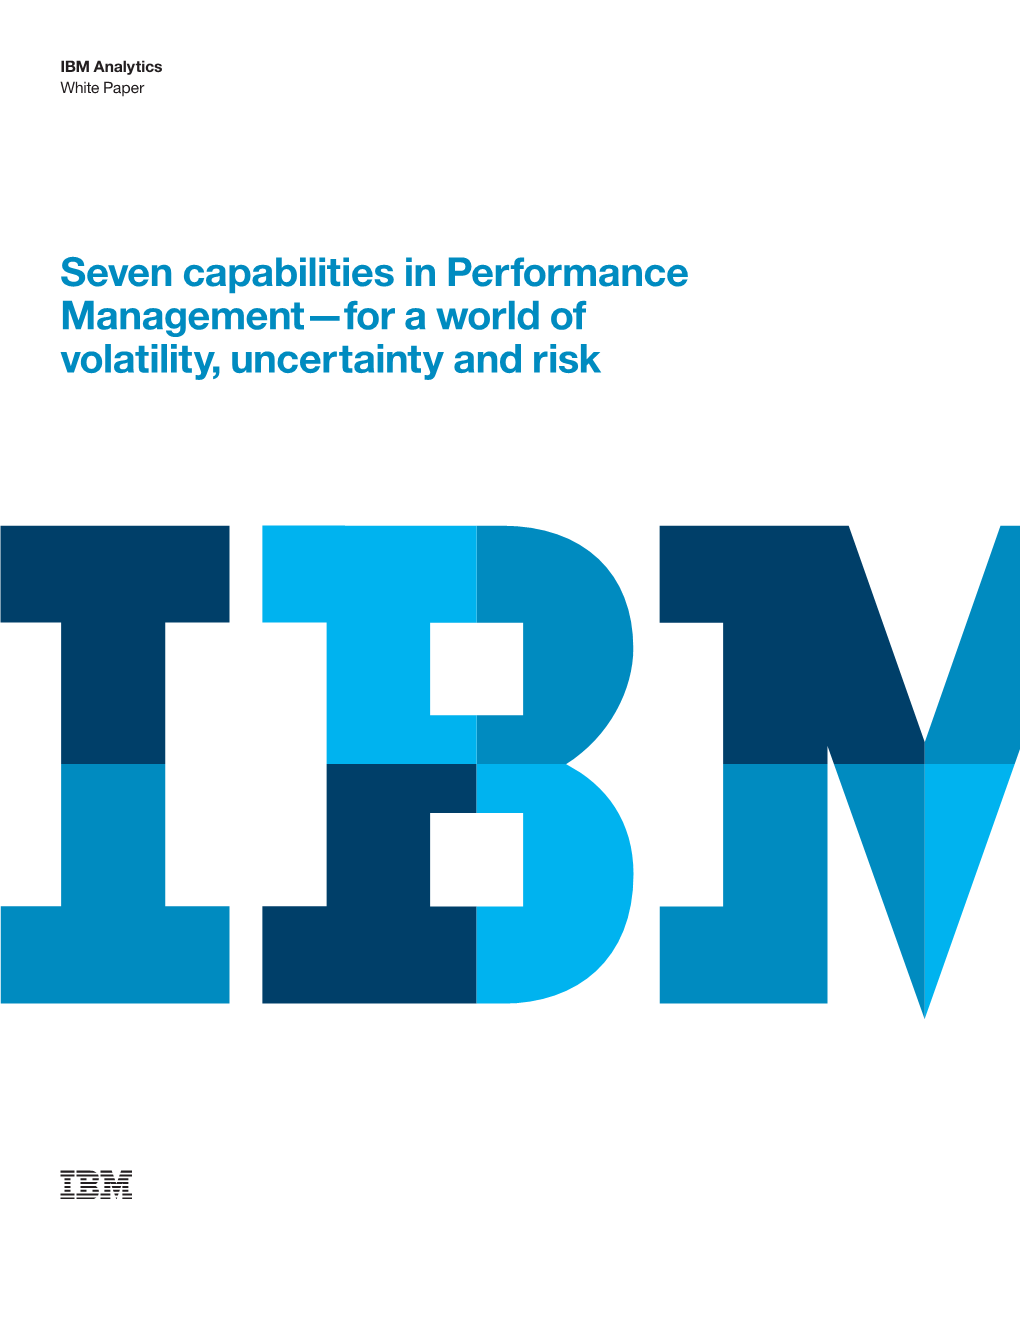 Seven Capabilities in Performance Management—For a World Of